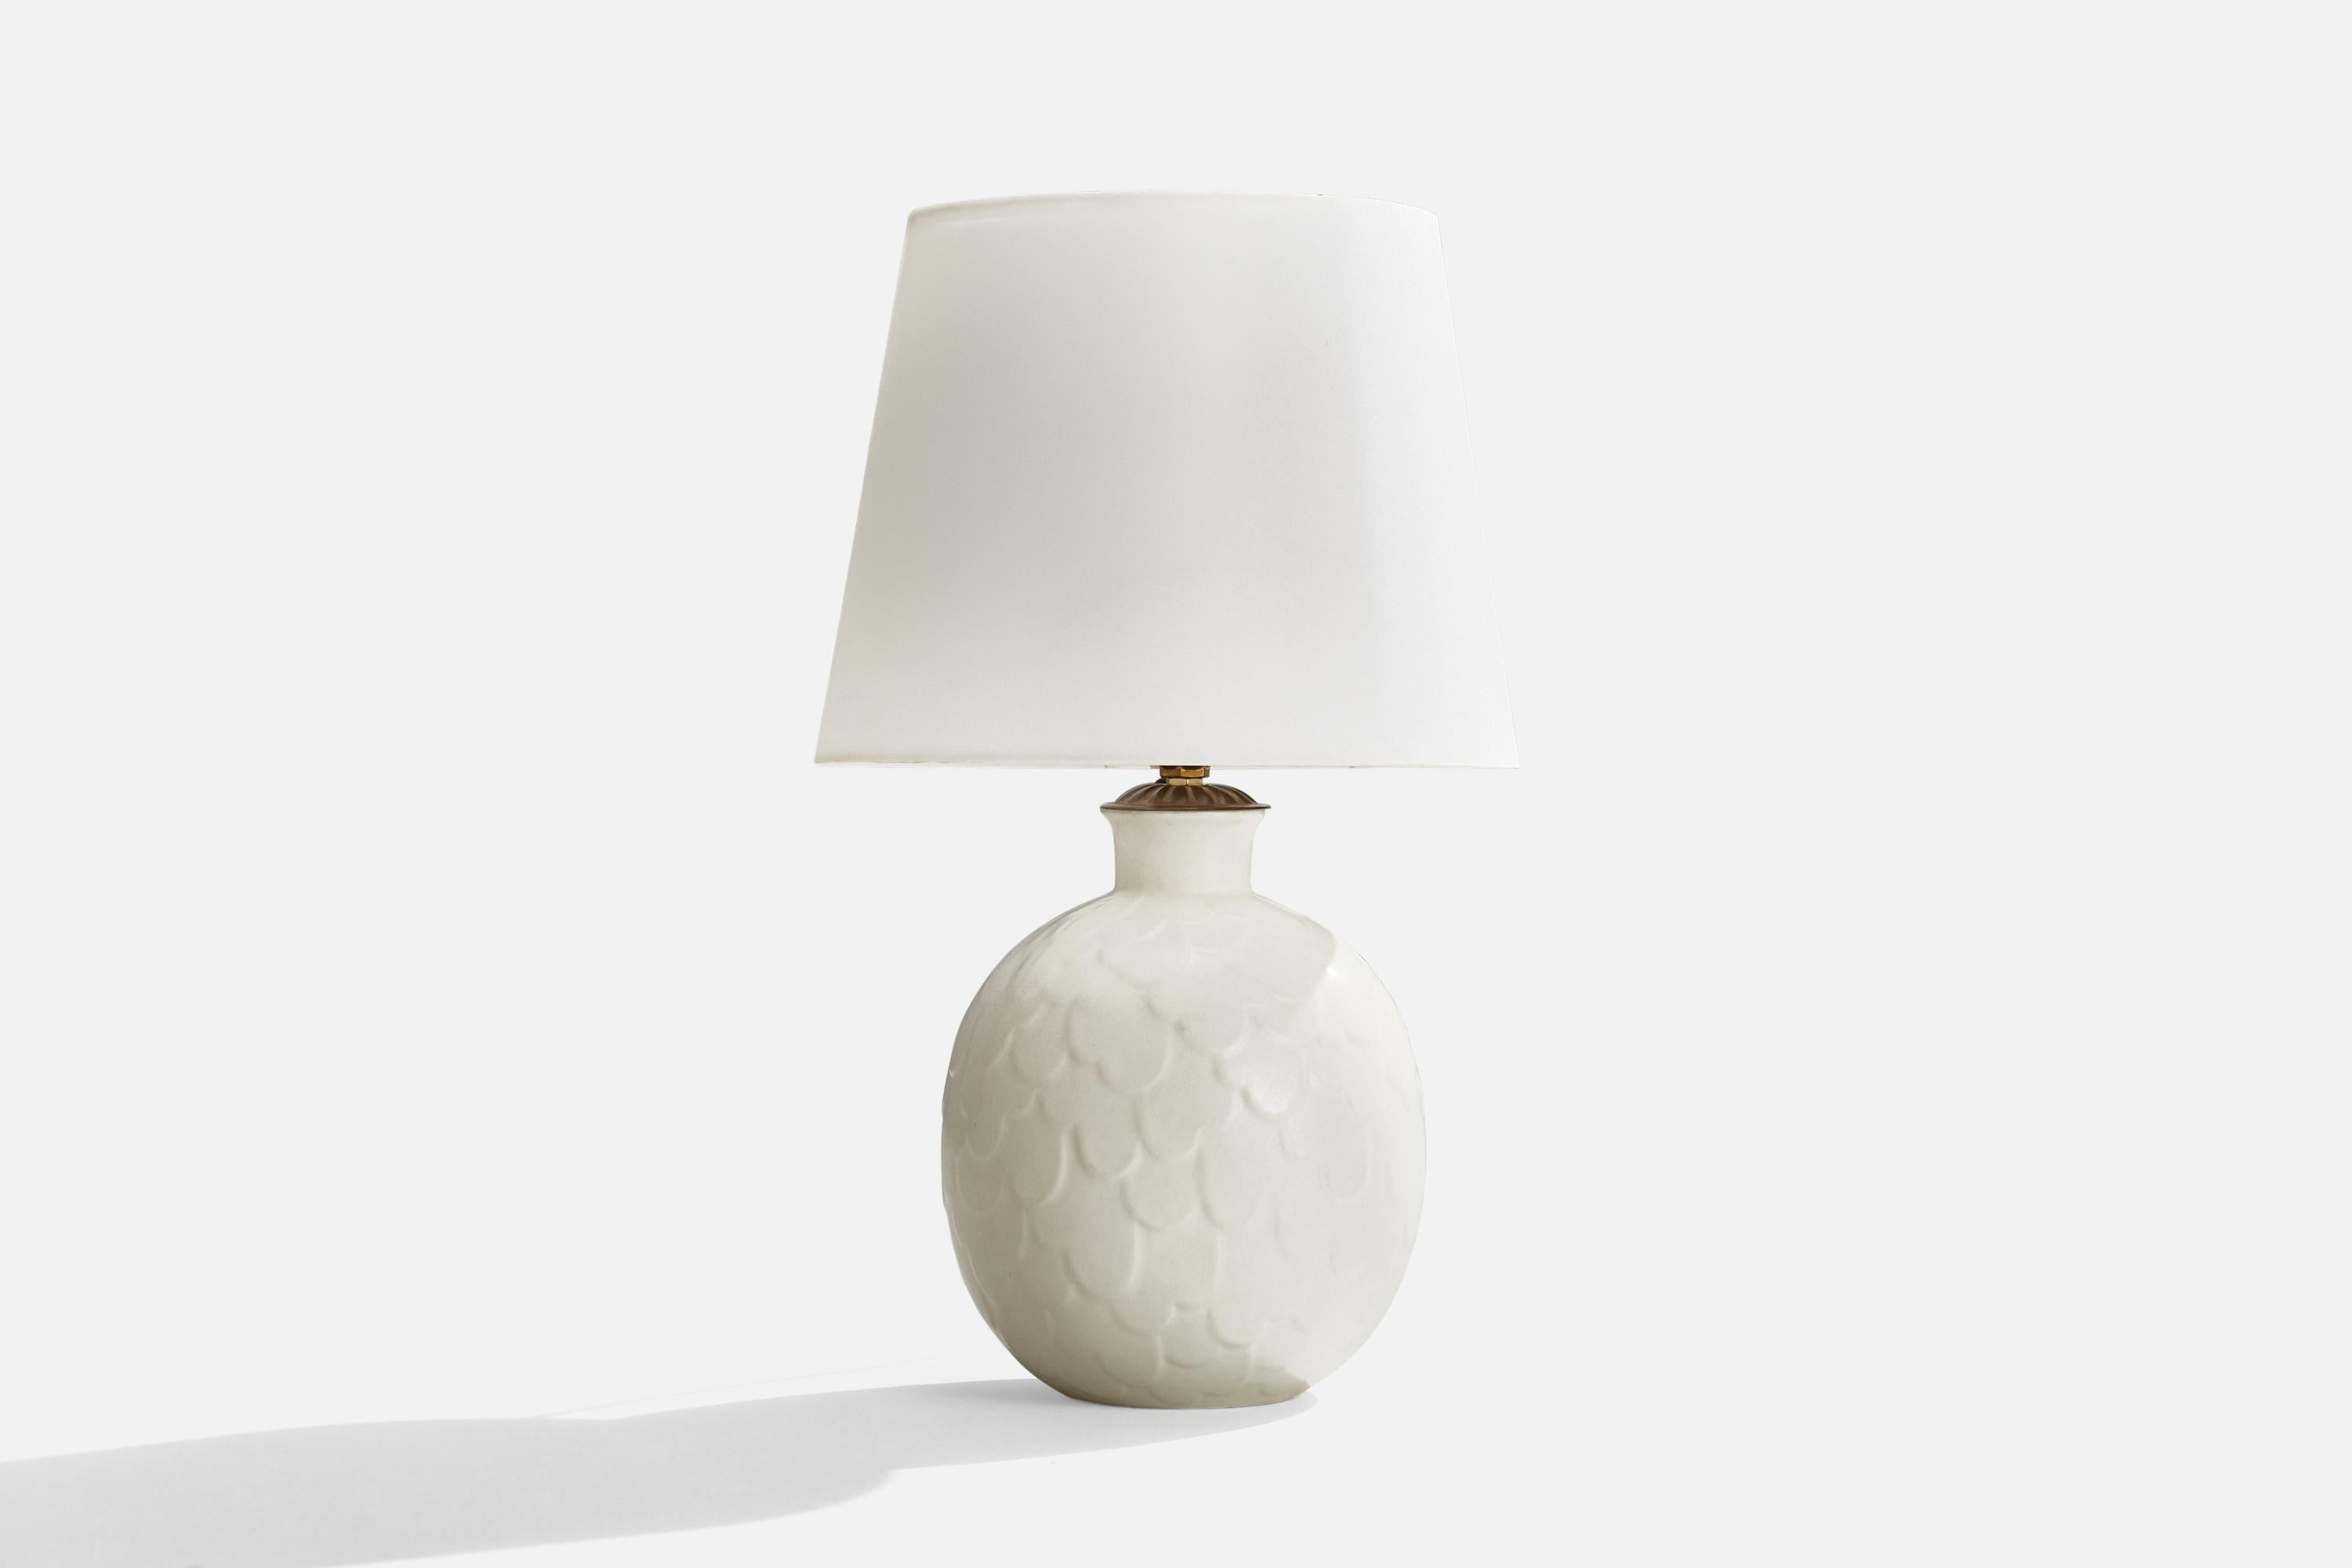 A white glazed stoneware and brass table lamp designed by Gertrud Lönegren and produced by Rörstrand, Sweden, c. 1940s.

Dimensions of Lamp (inches): 11.5” H x 7” Diameter
Dimensions of Shade (inches): 7.5”  Top Diameter x 10” Bottom Diameter x 8”